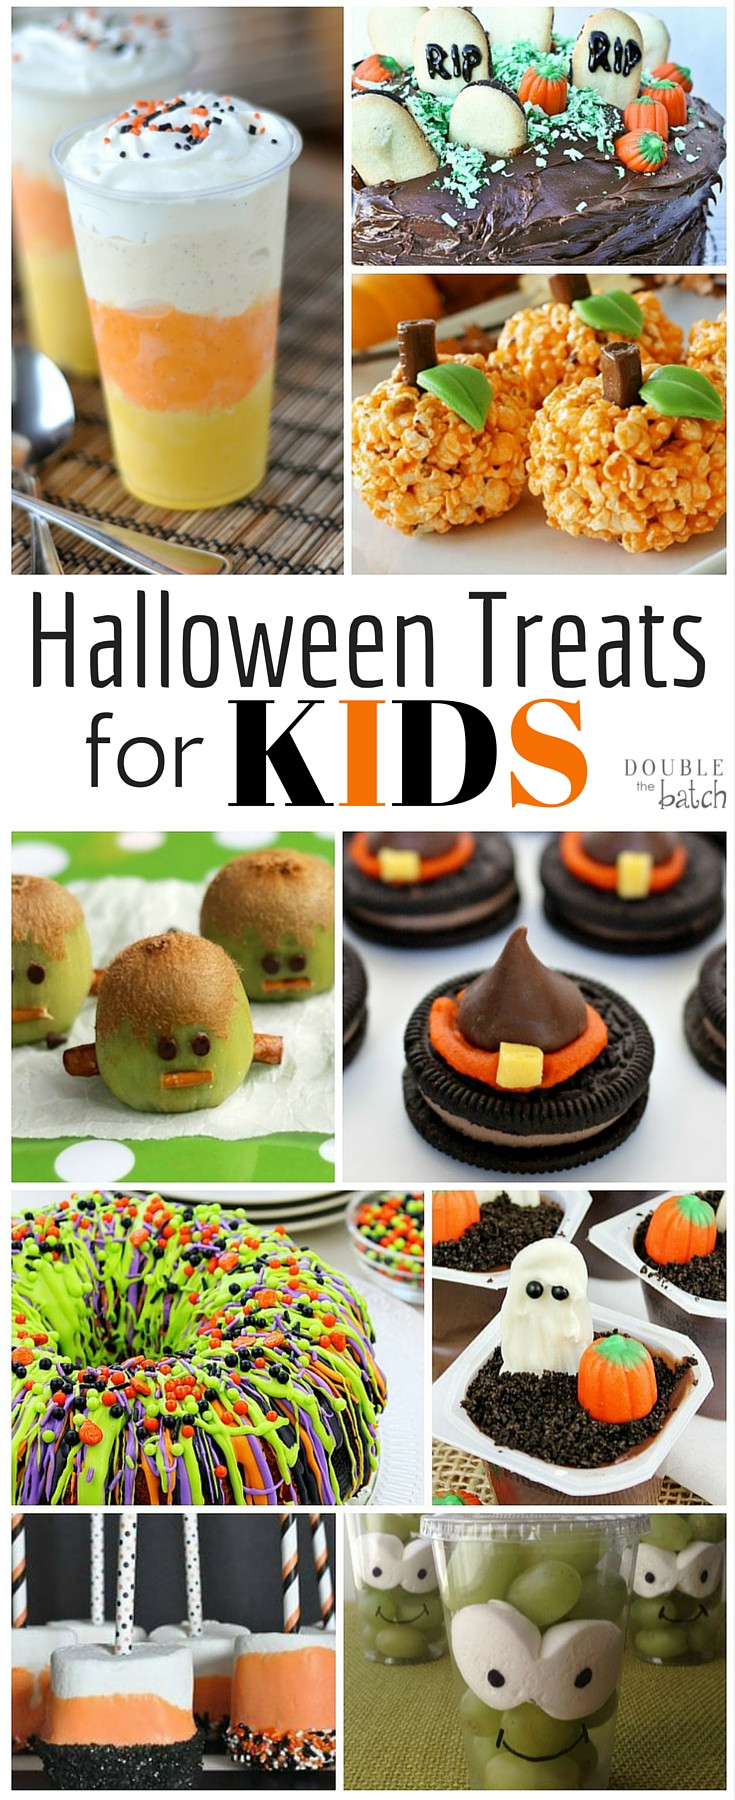 Fall Desserts For Kids
 Fun Halloween Treats for Kids Double the Batch